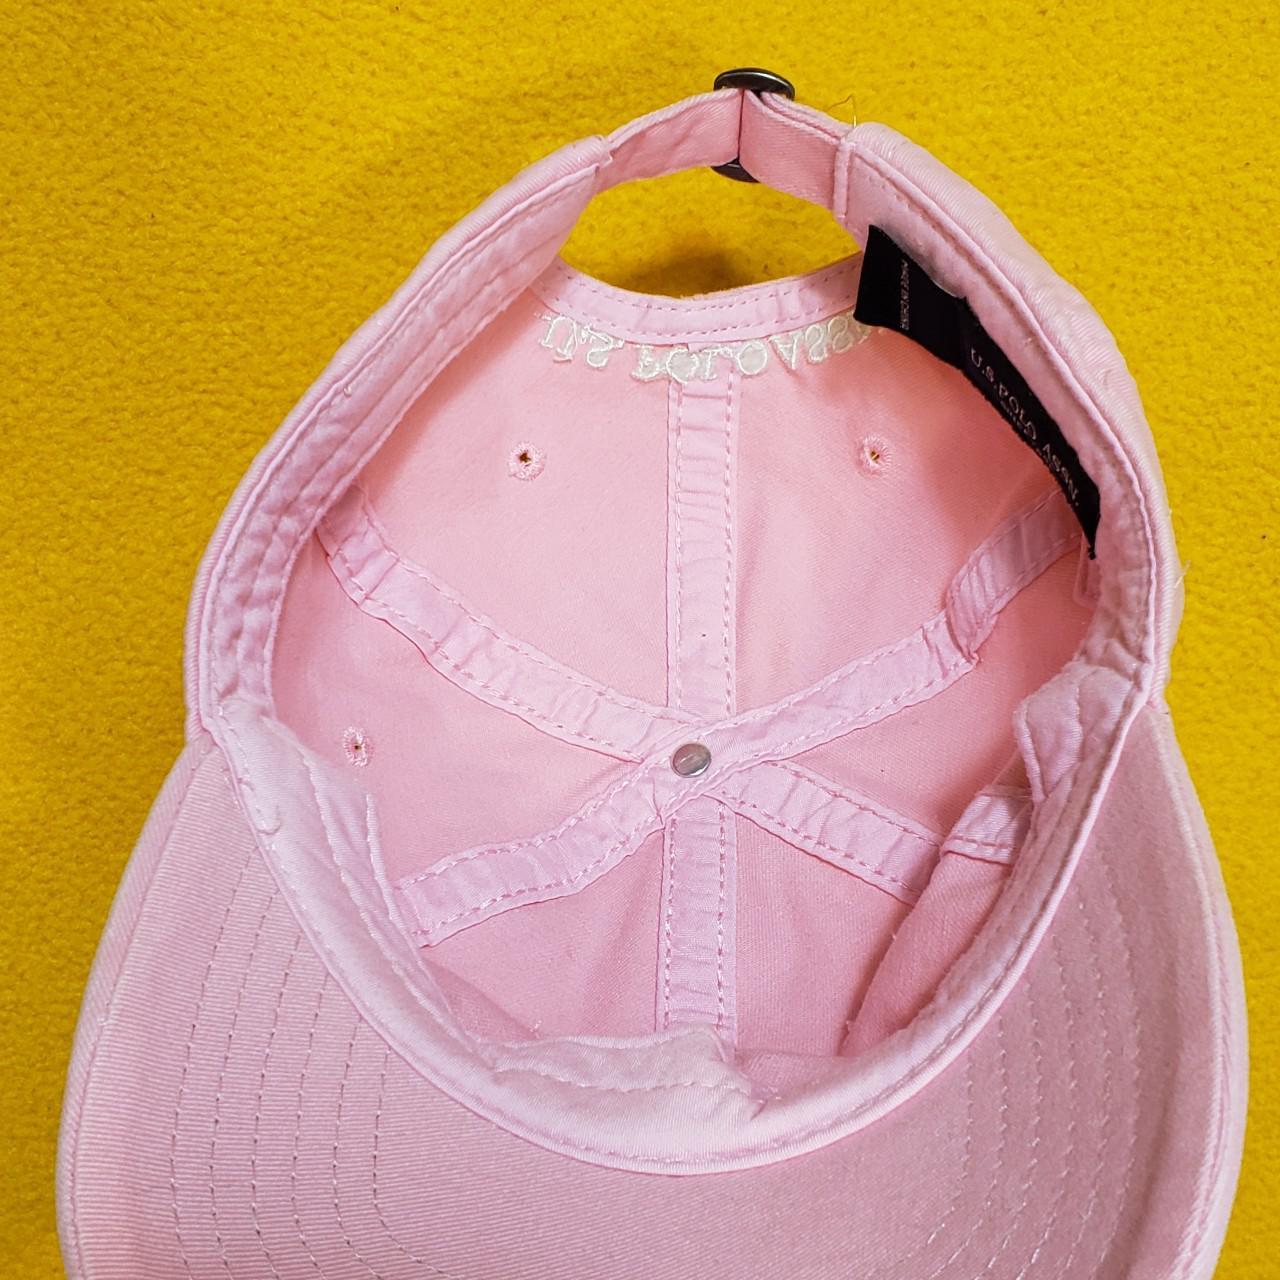 U.S. Polo Assn. Men's Pink and White Hat (3)